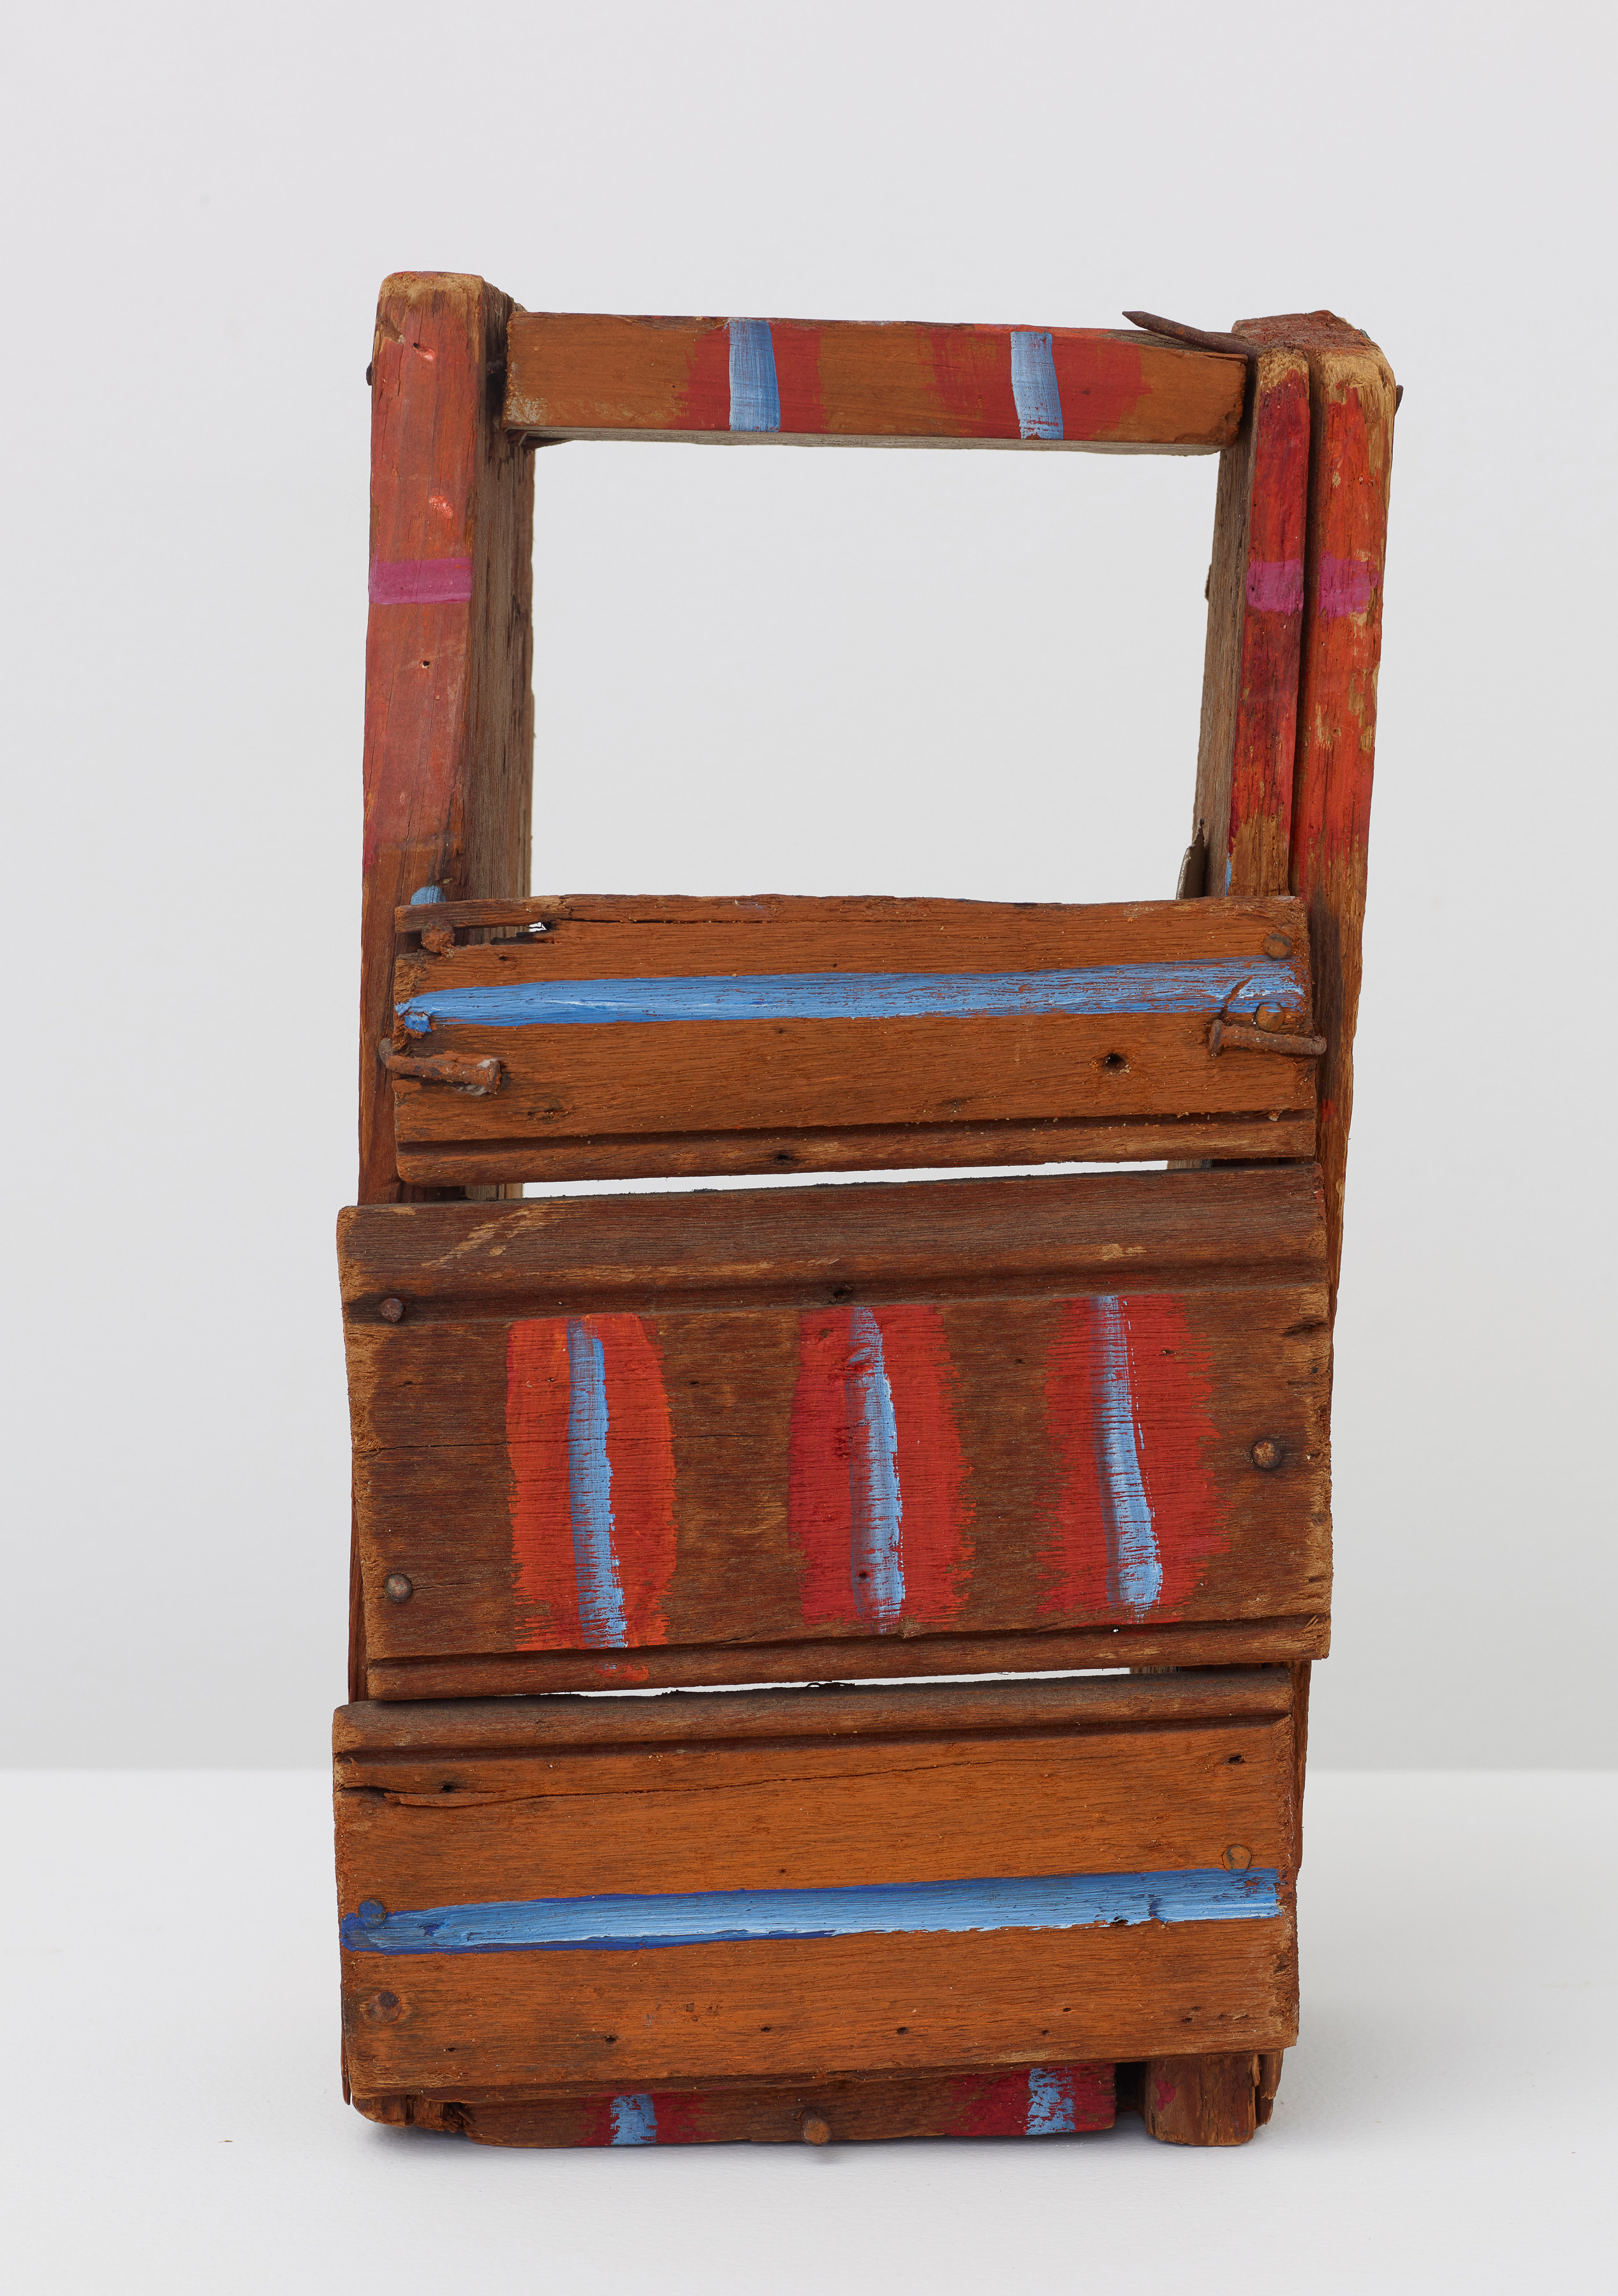 Punch and Judy Theater, 1975, Acrylic on wood